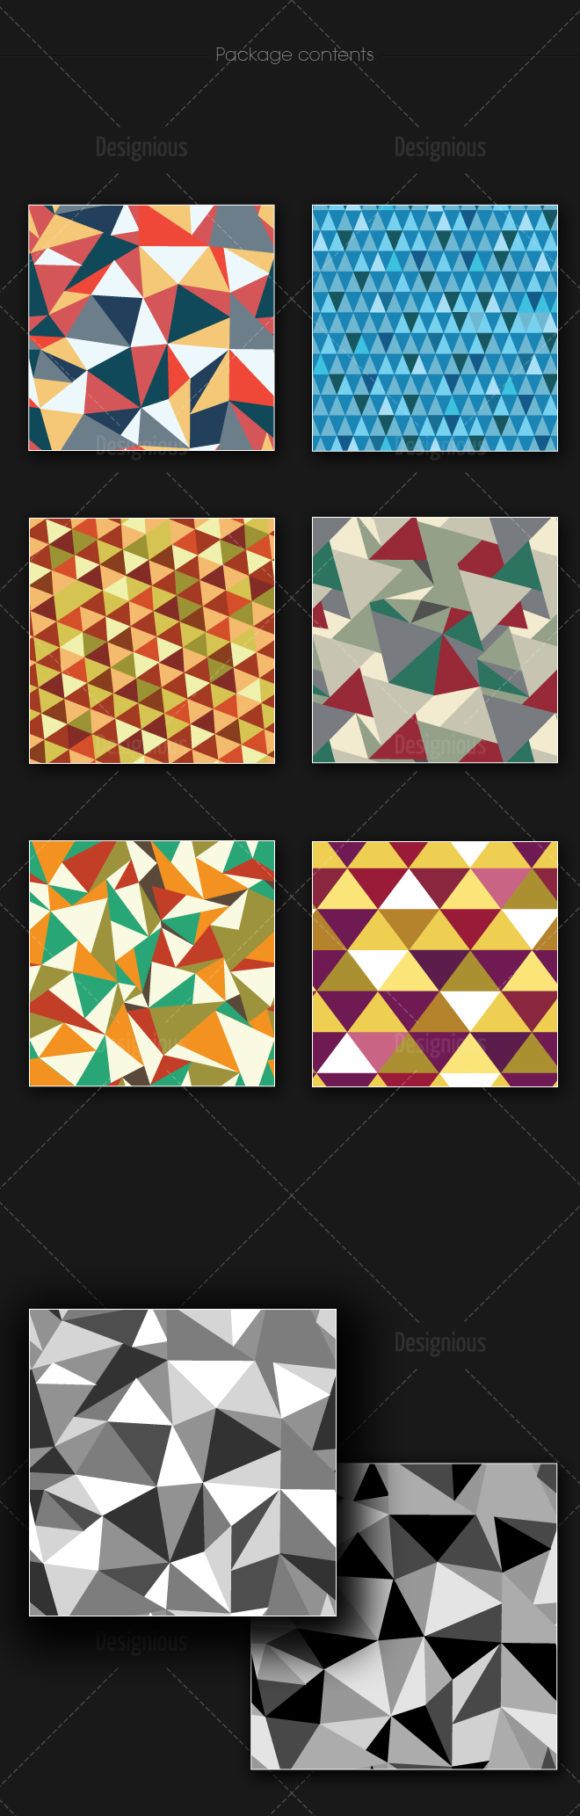 Seamless Patterns Vector Pack 160 2